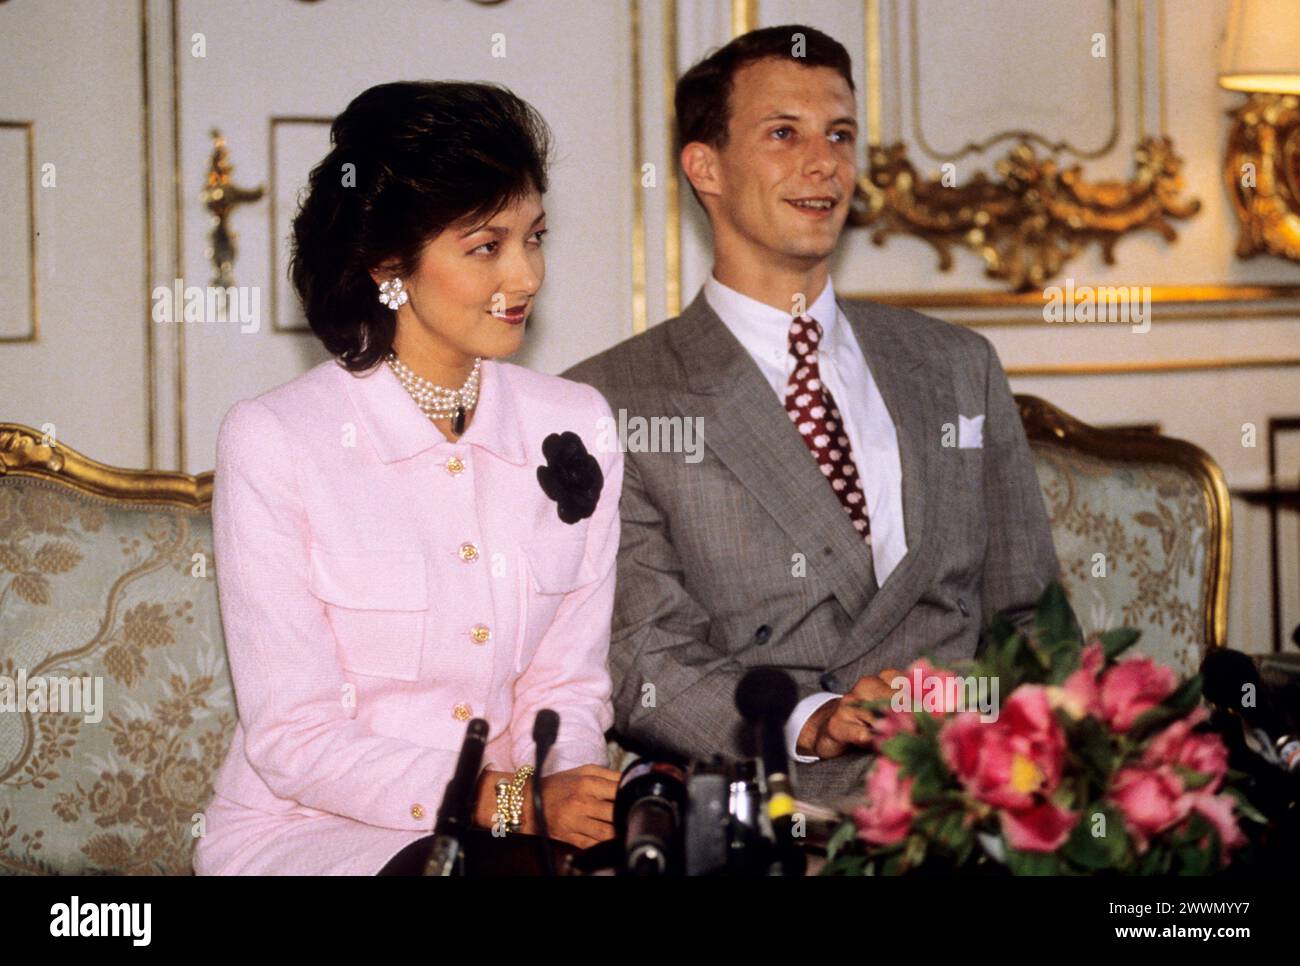 PRINCE JOACHIM of Denmark at the announcement of his engagement to Alexandra Manley of Hong Kong at the Royal Palace in Copenhagen Stock Photo